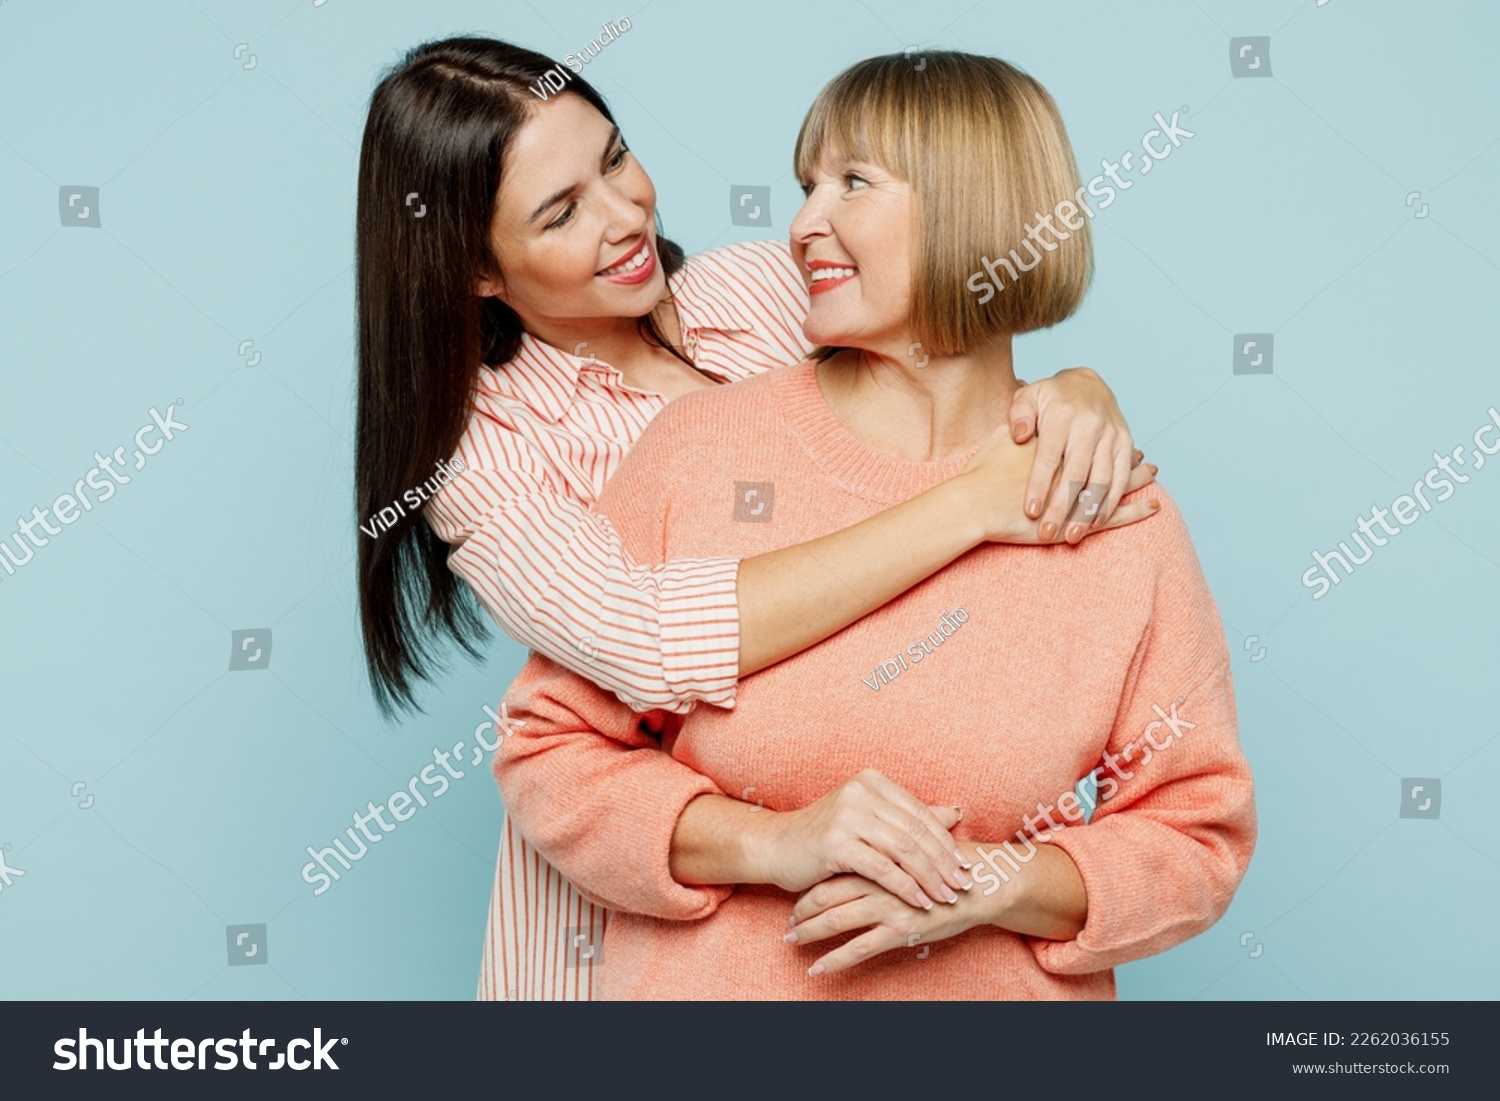 Cheerful fun satisfied elder parent mom with young adult daughter two women together wearing casual clothes hugging cuddle look to each other isolated on plain blue cyan background. Family day concept #2262036155